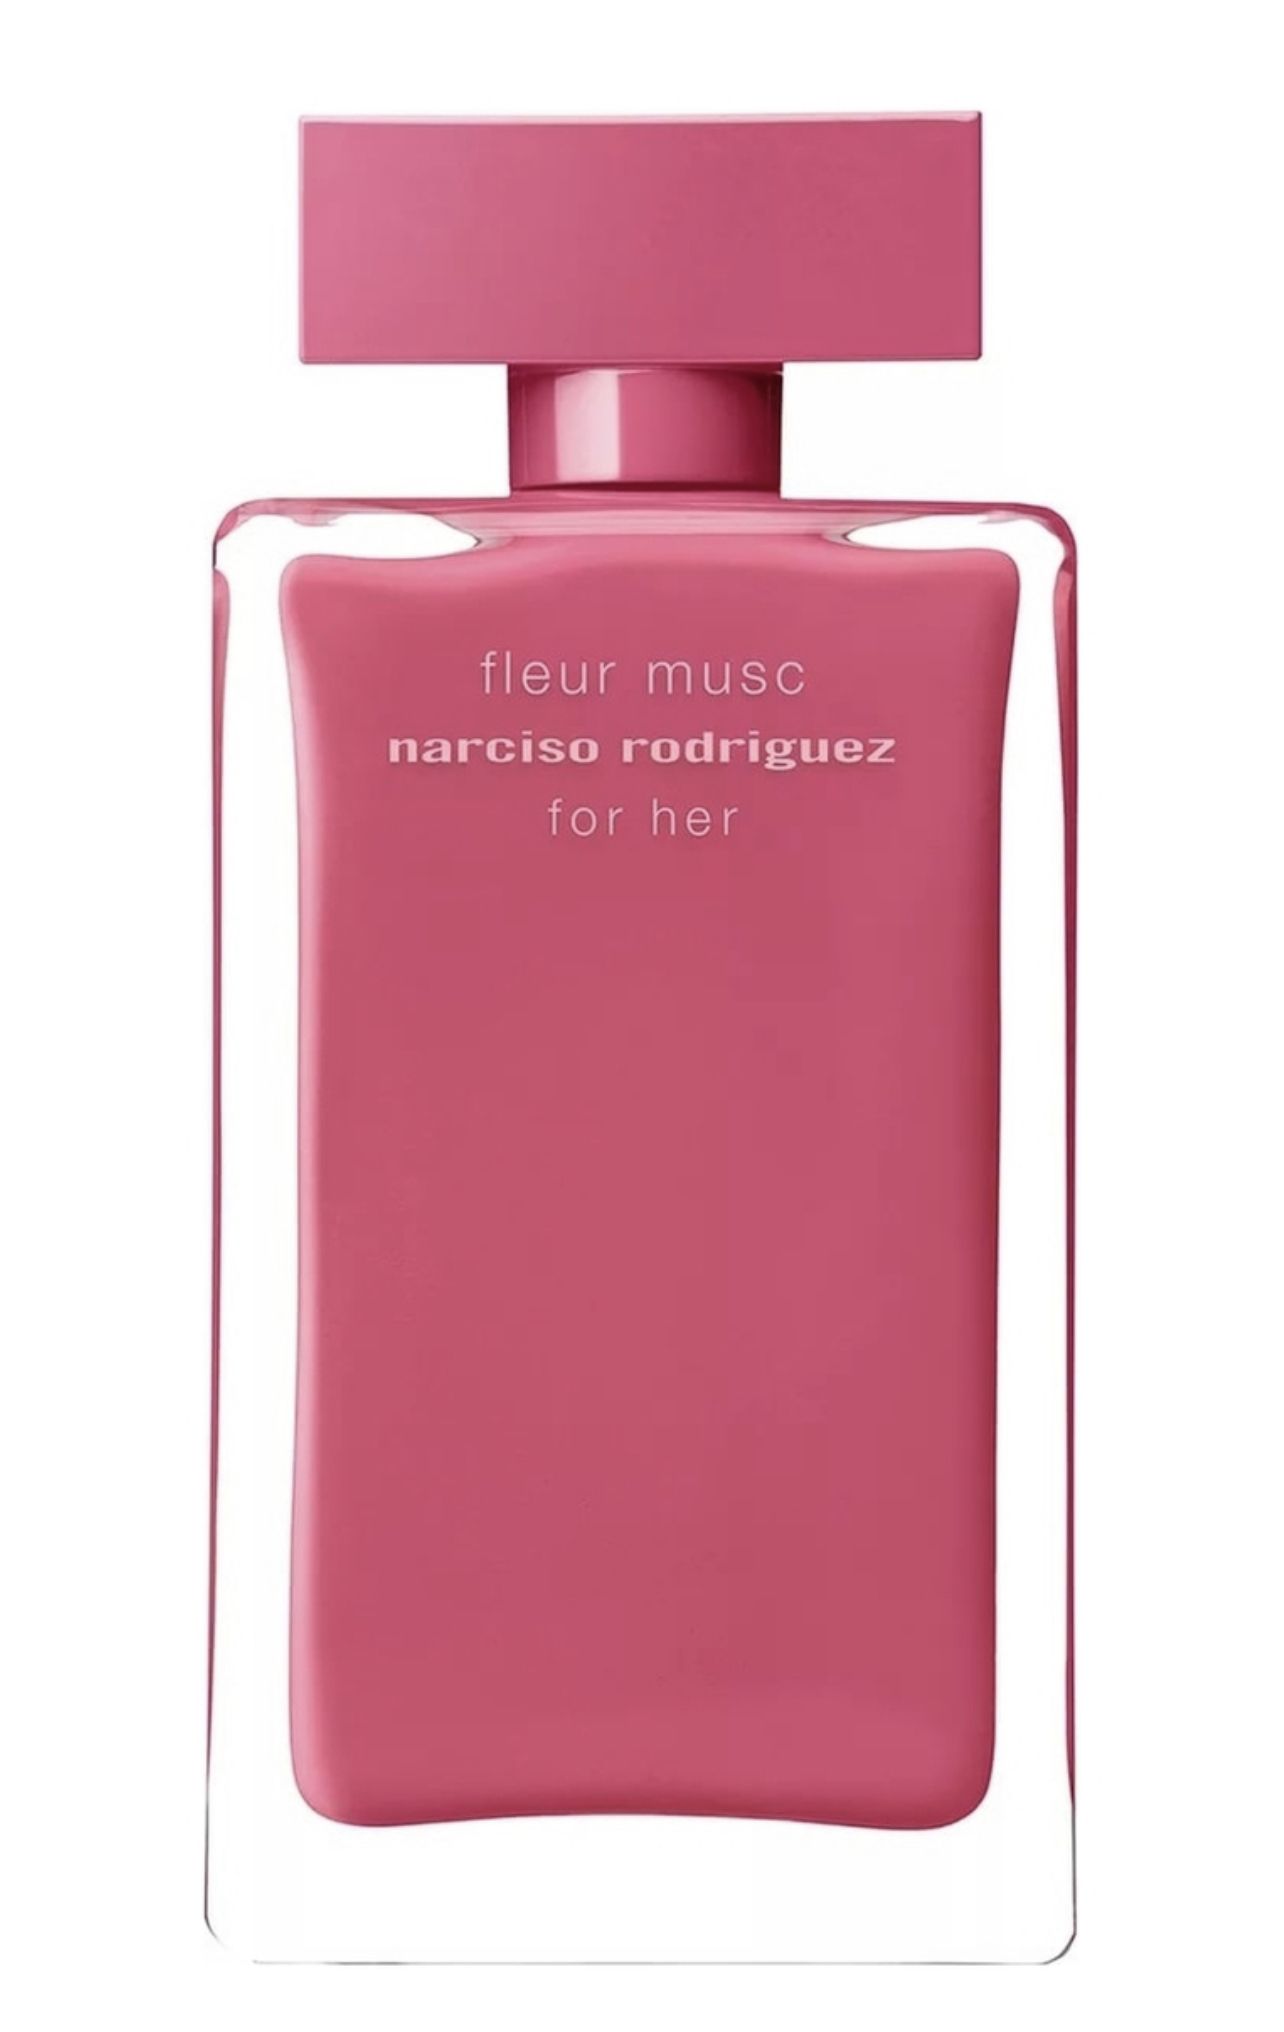 Туалетная вода narciso. Narciso Rodriguez fleur Musc for her, 100 ml. Narciso Rodriguez fleur Musc for her 20мл. Narciso Rodriguez for her fleur Musc EDP 50ml. Духи fleur Musc Narciso Rodriguez for her.